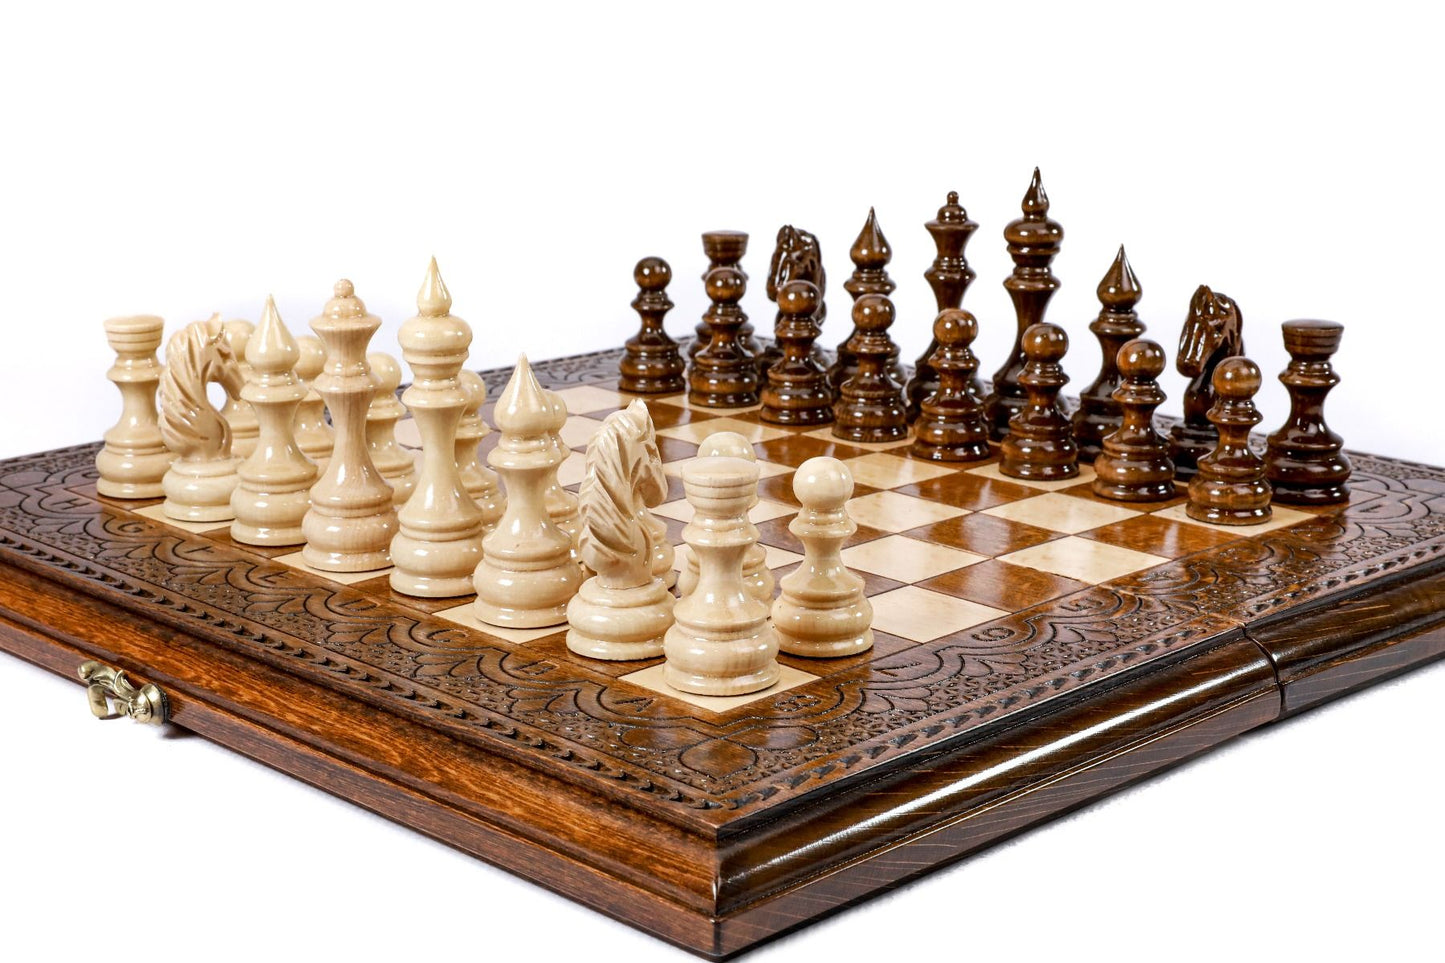 Dive into the world of chess with a set that combines classic gameplay with unique, artisanal craftsmanship on a wooden canvas.